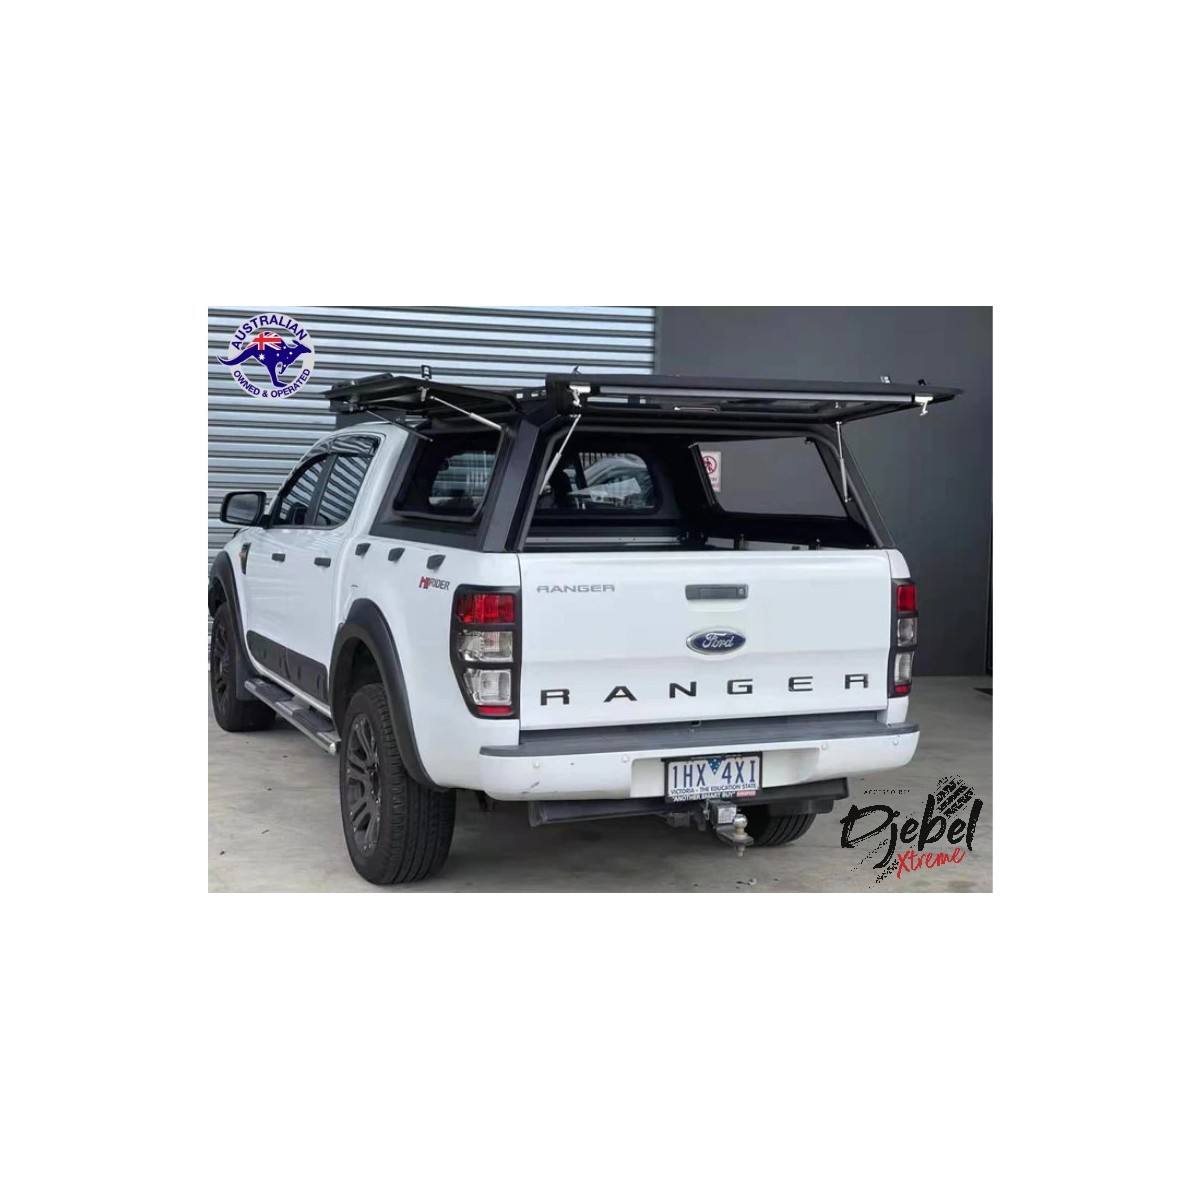 HARD TOP DJEBELXTREME - FORD RANGER  DOUBLE CABINE